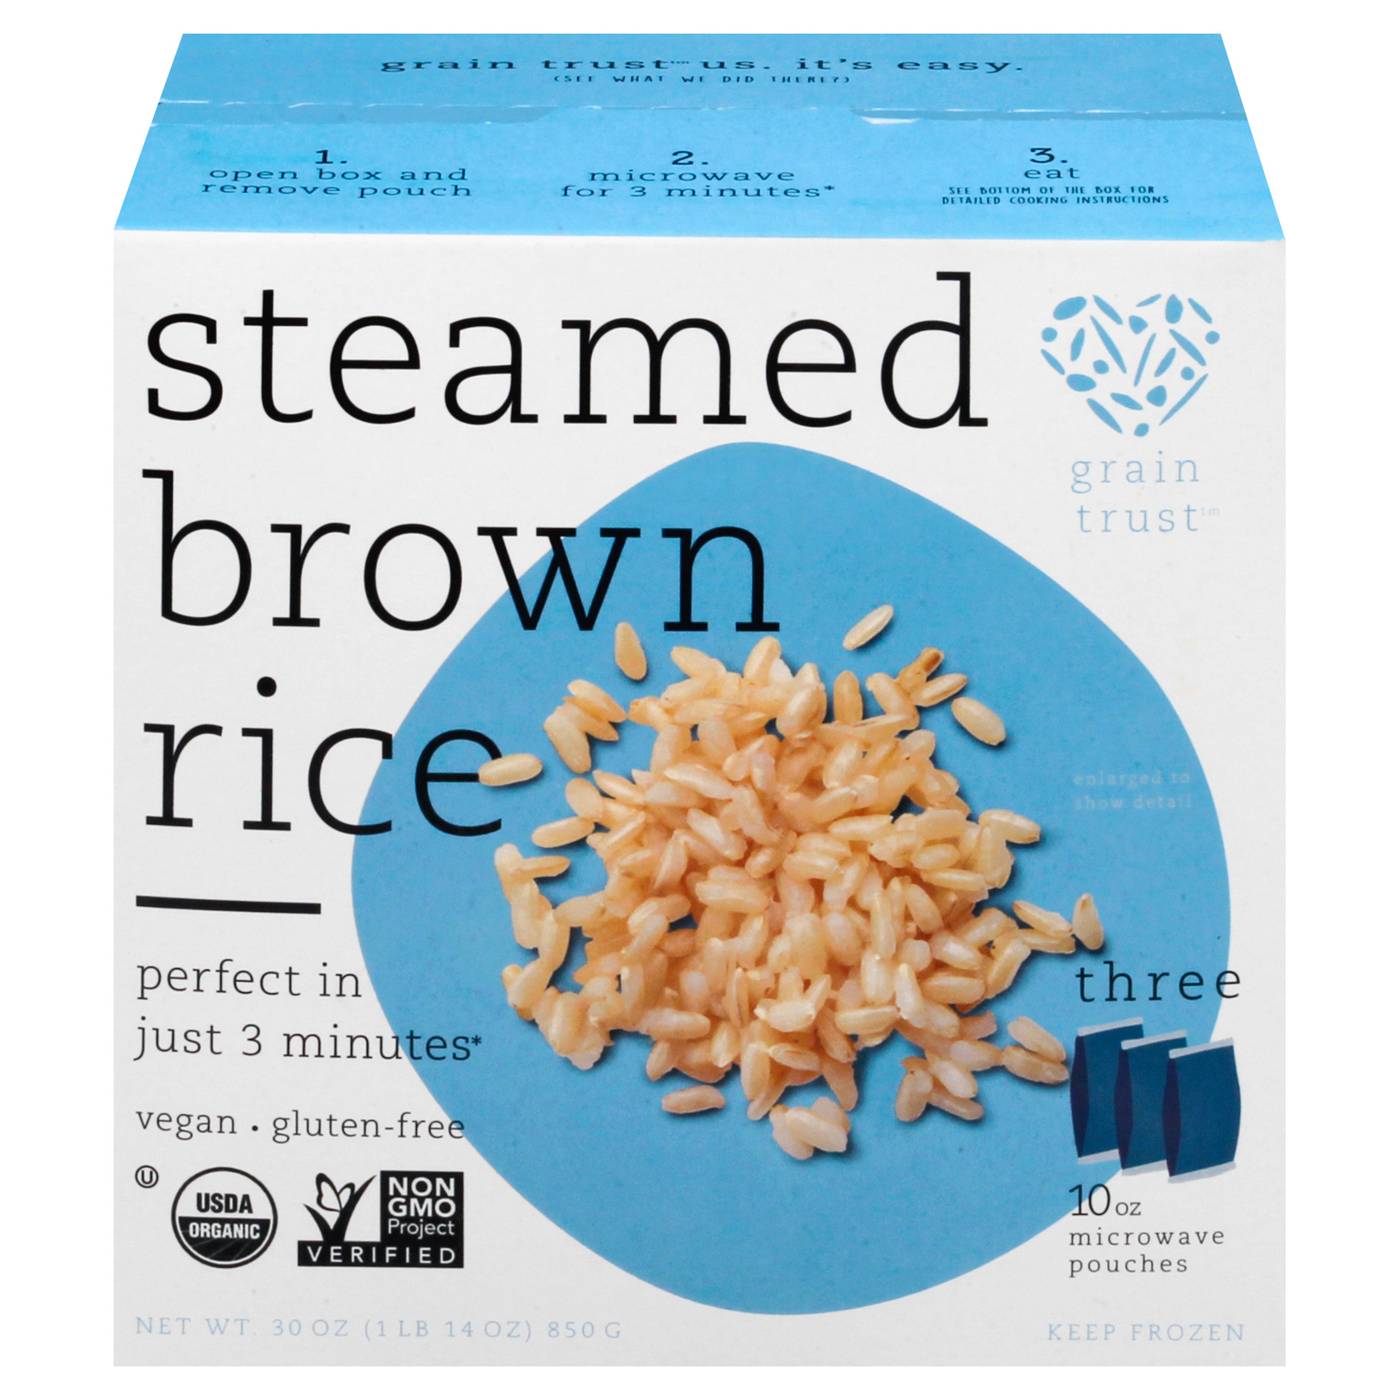 Grain Trust Steamed Brown Rice; image 1 of 2